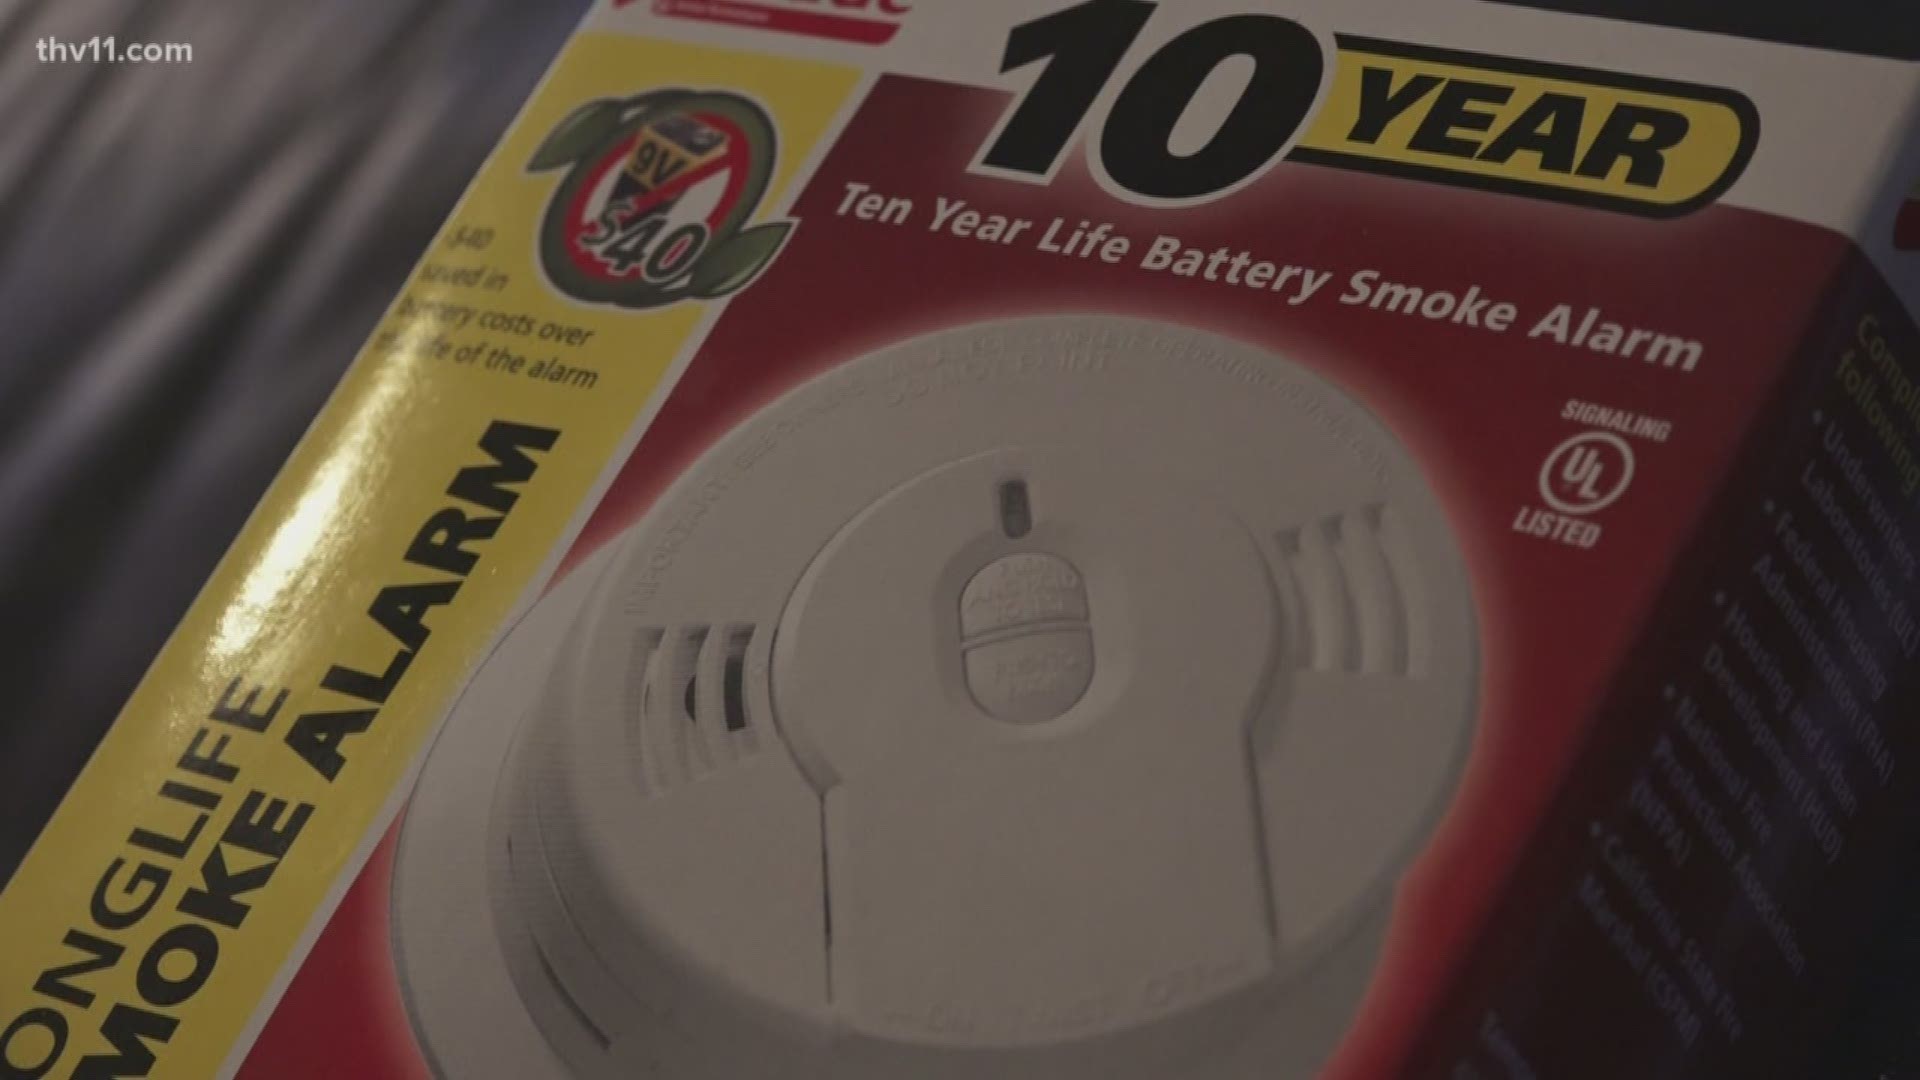 There's a new type of smoke detector that lasts 10 years.